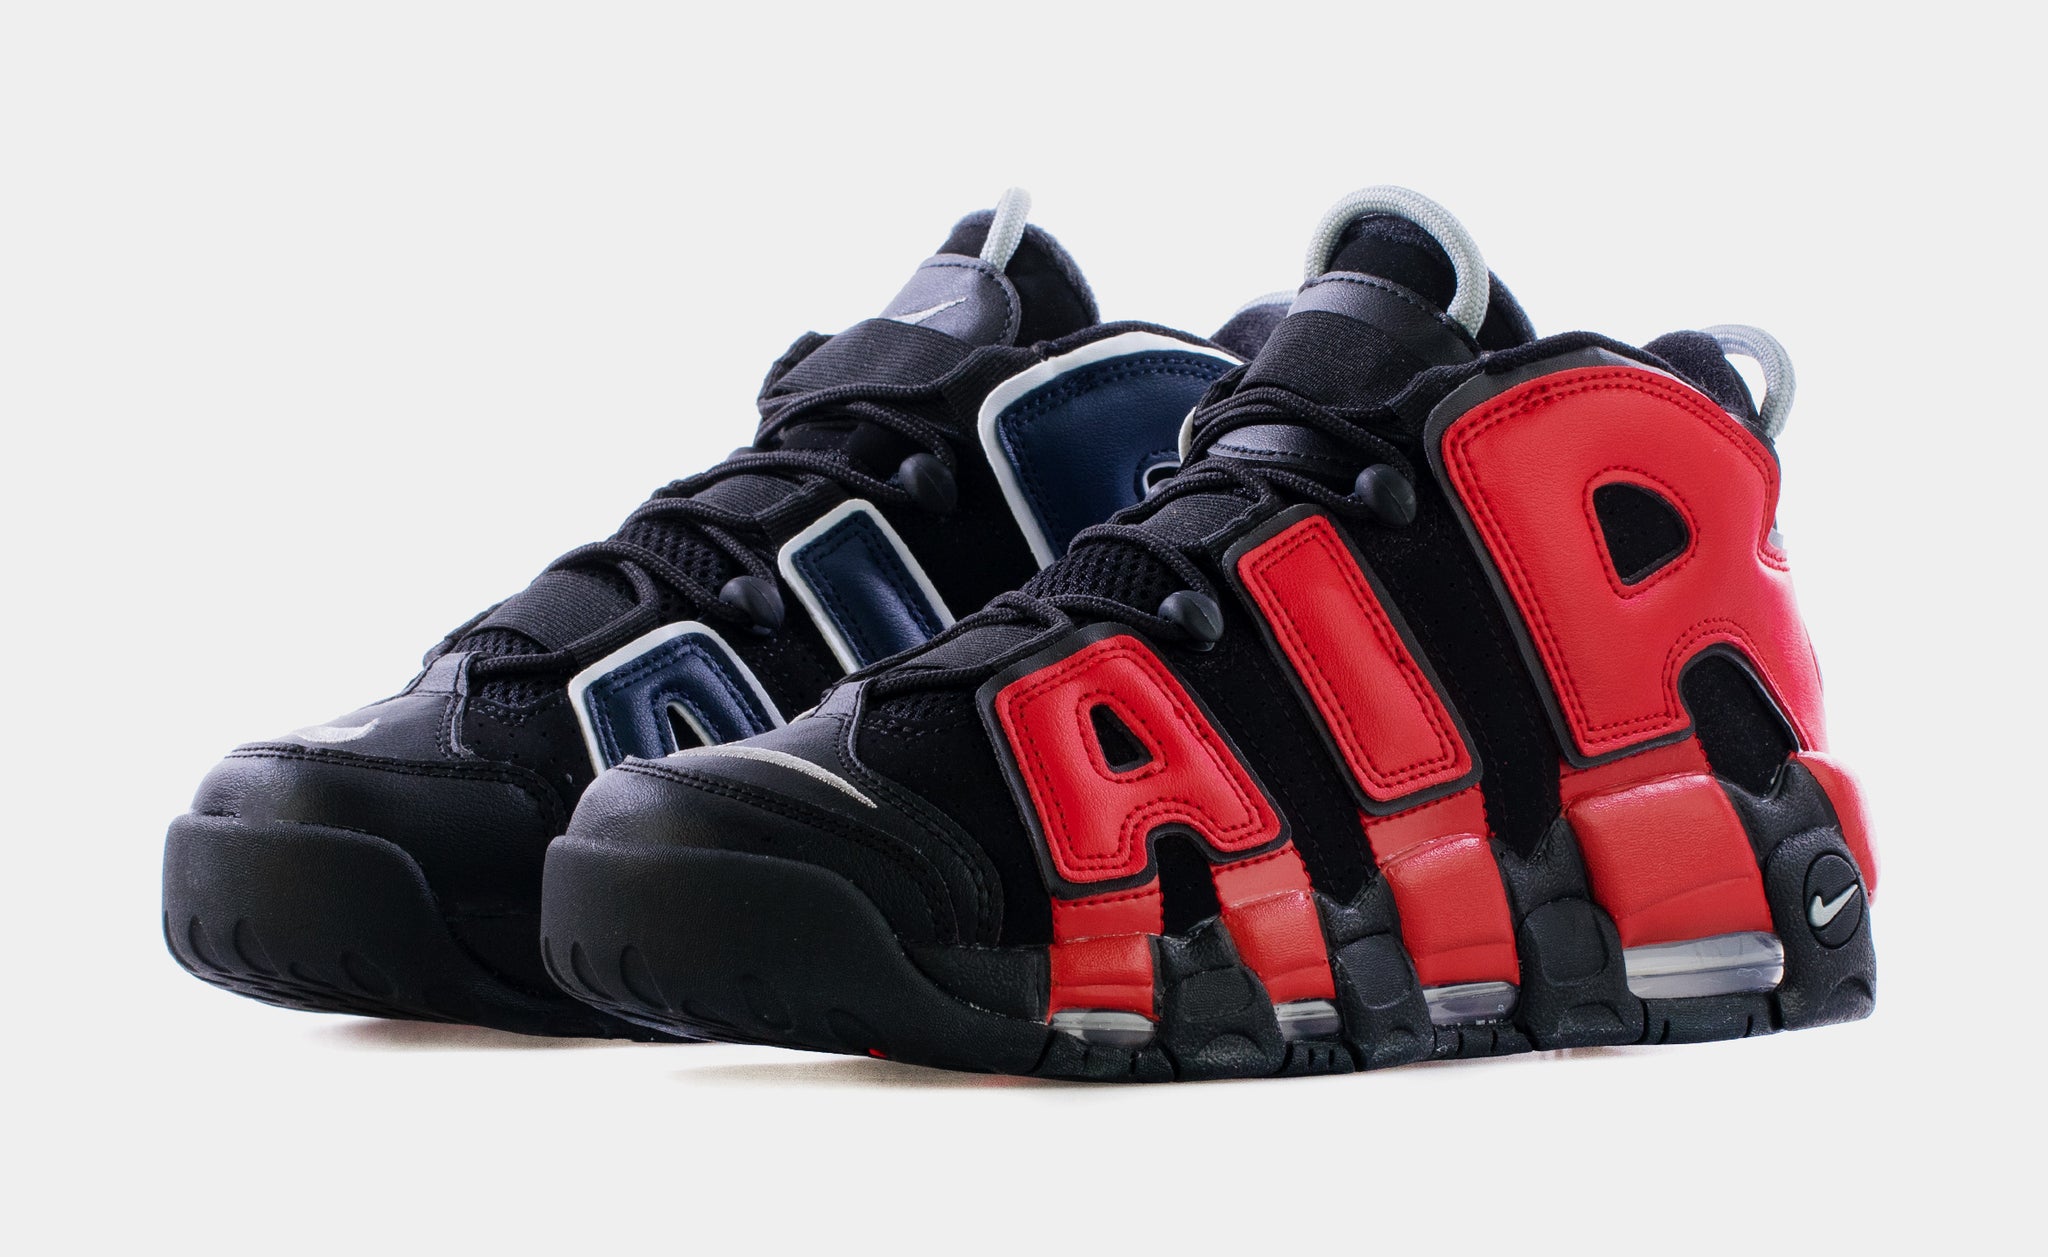 Nike Women's Air More Uptempo Shoes